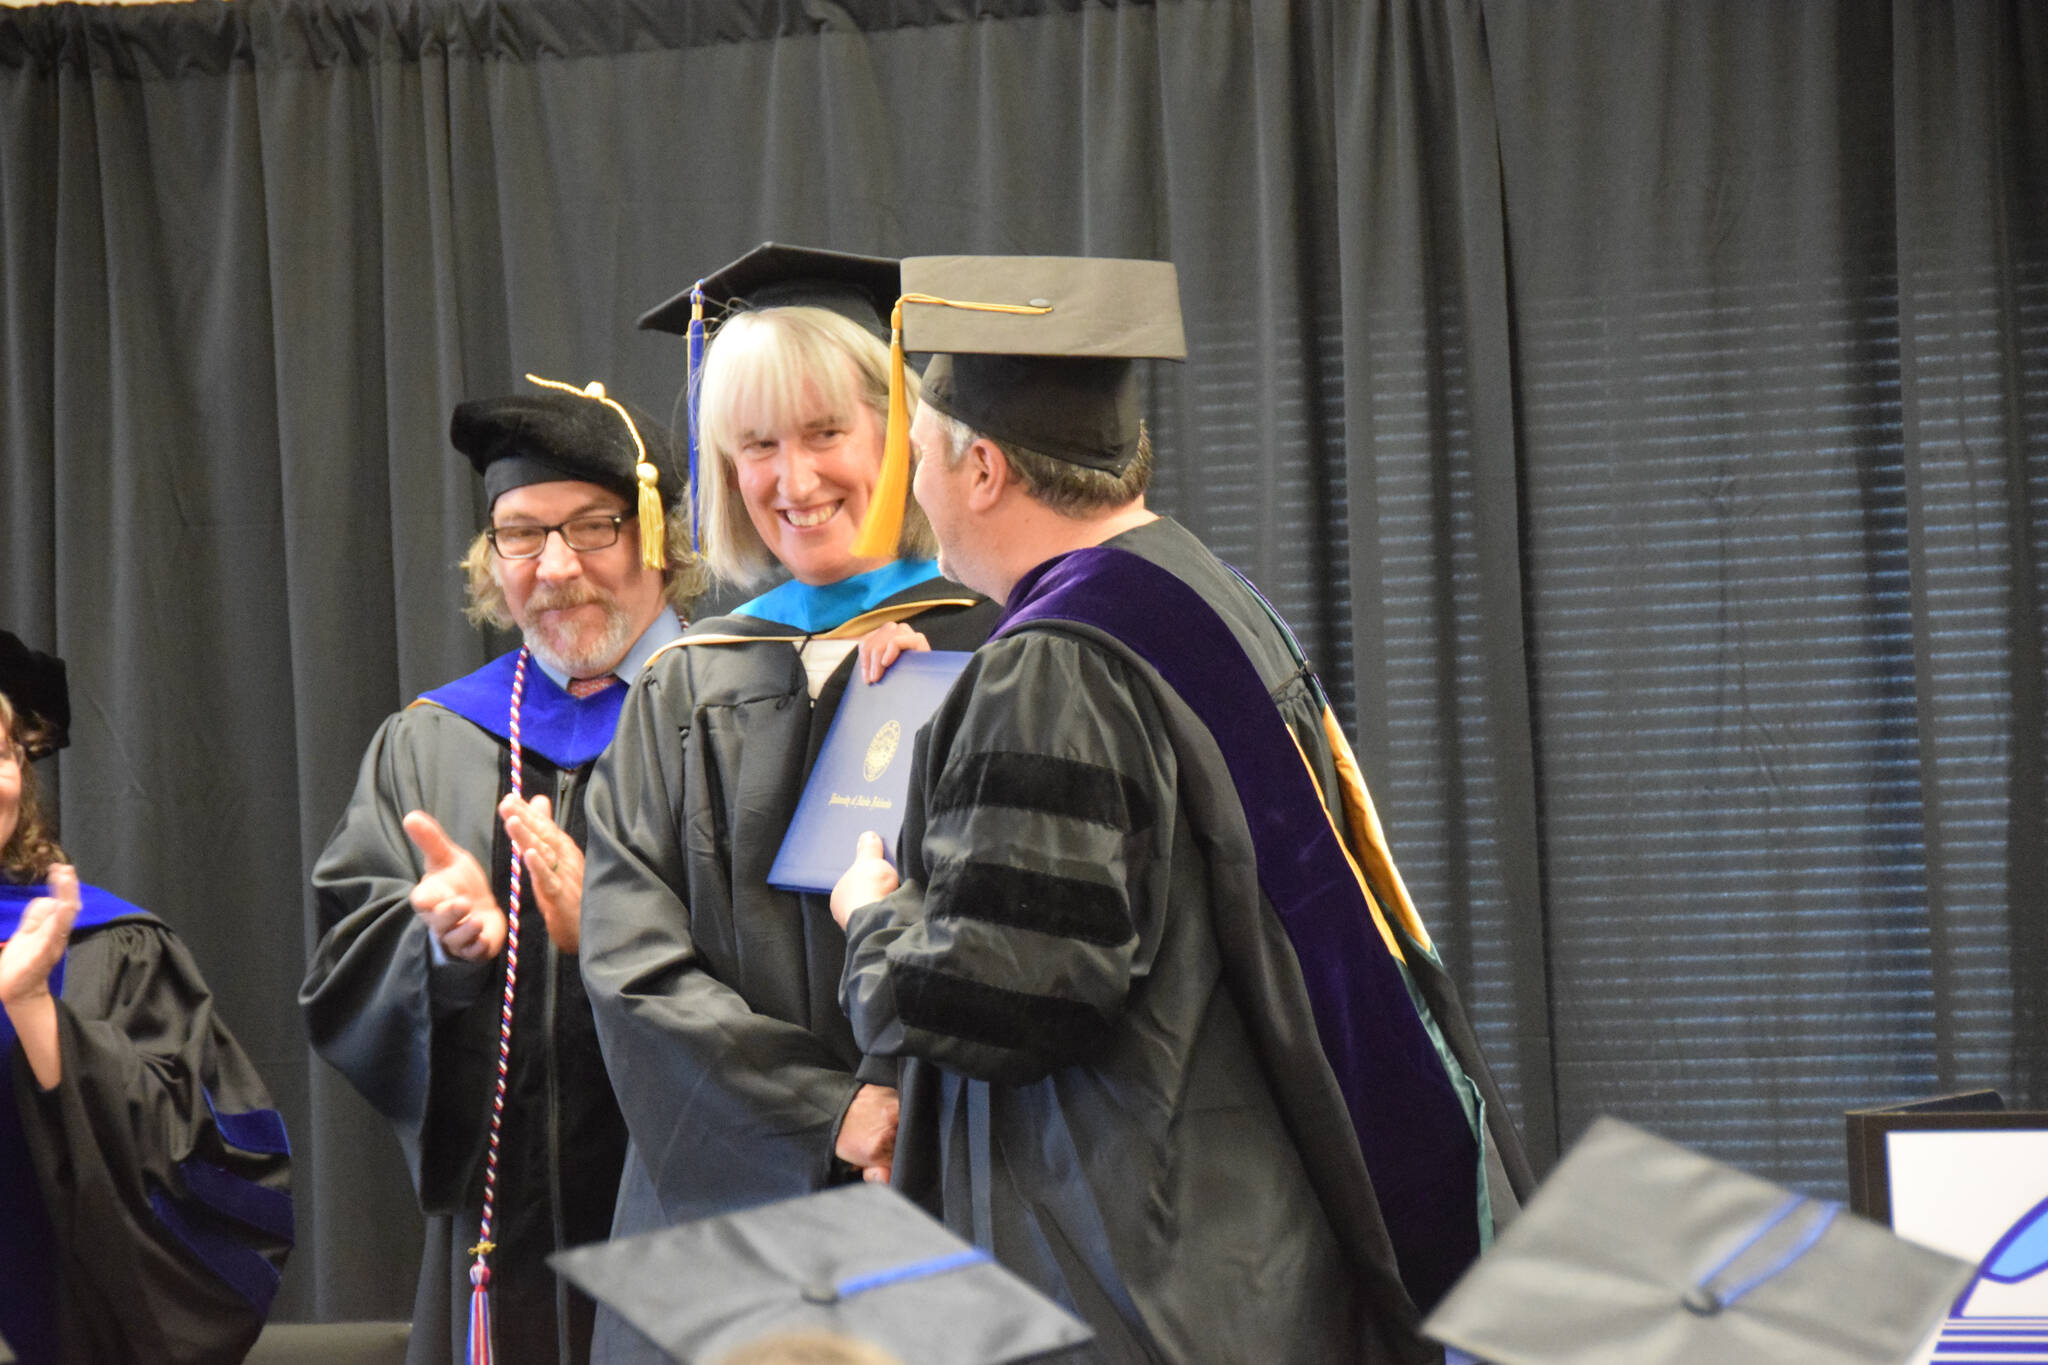 University of Alaska Fairbanks’s Dr. Peter Westley presents Dorothy Sherwood with her diploma and master’s hood during the 2023 KBC Commencement on Wednesday, May 10, 2023 in Homer, Alaska. Sherwood earned her One Health Masters degree through UAF. (Photo by Delcenia Cosman/Homer News)